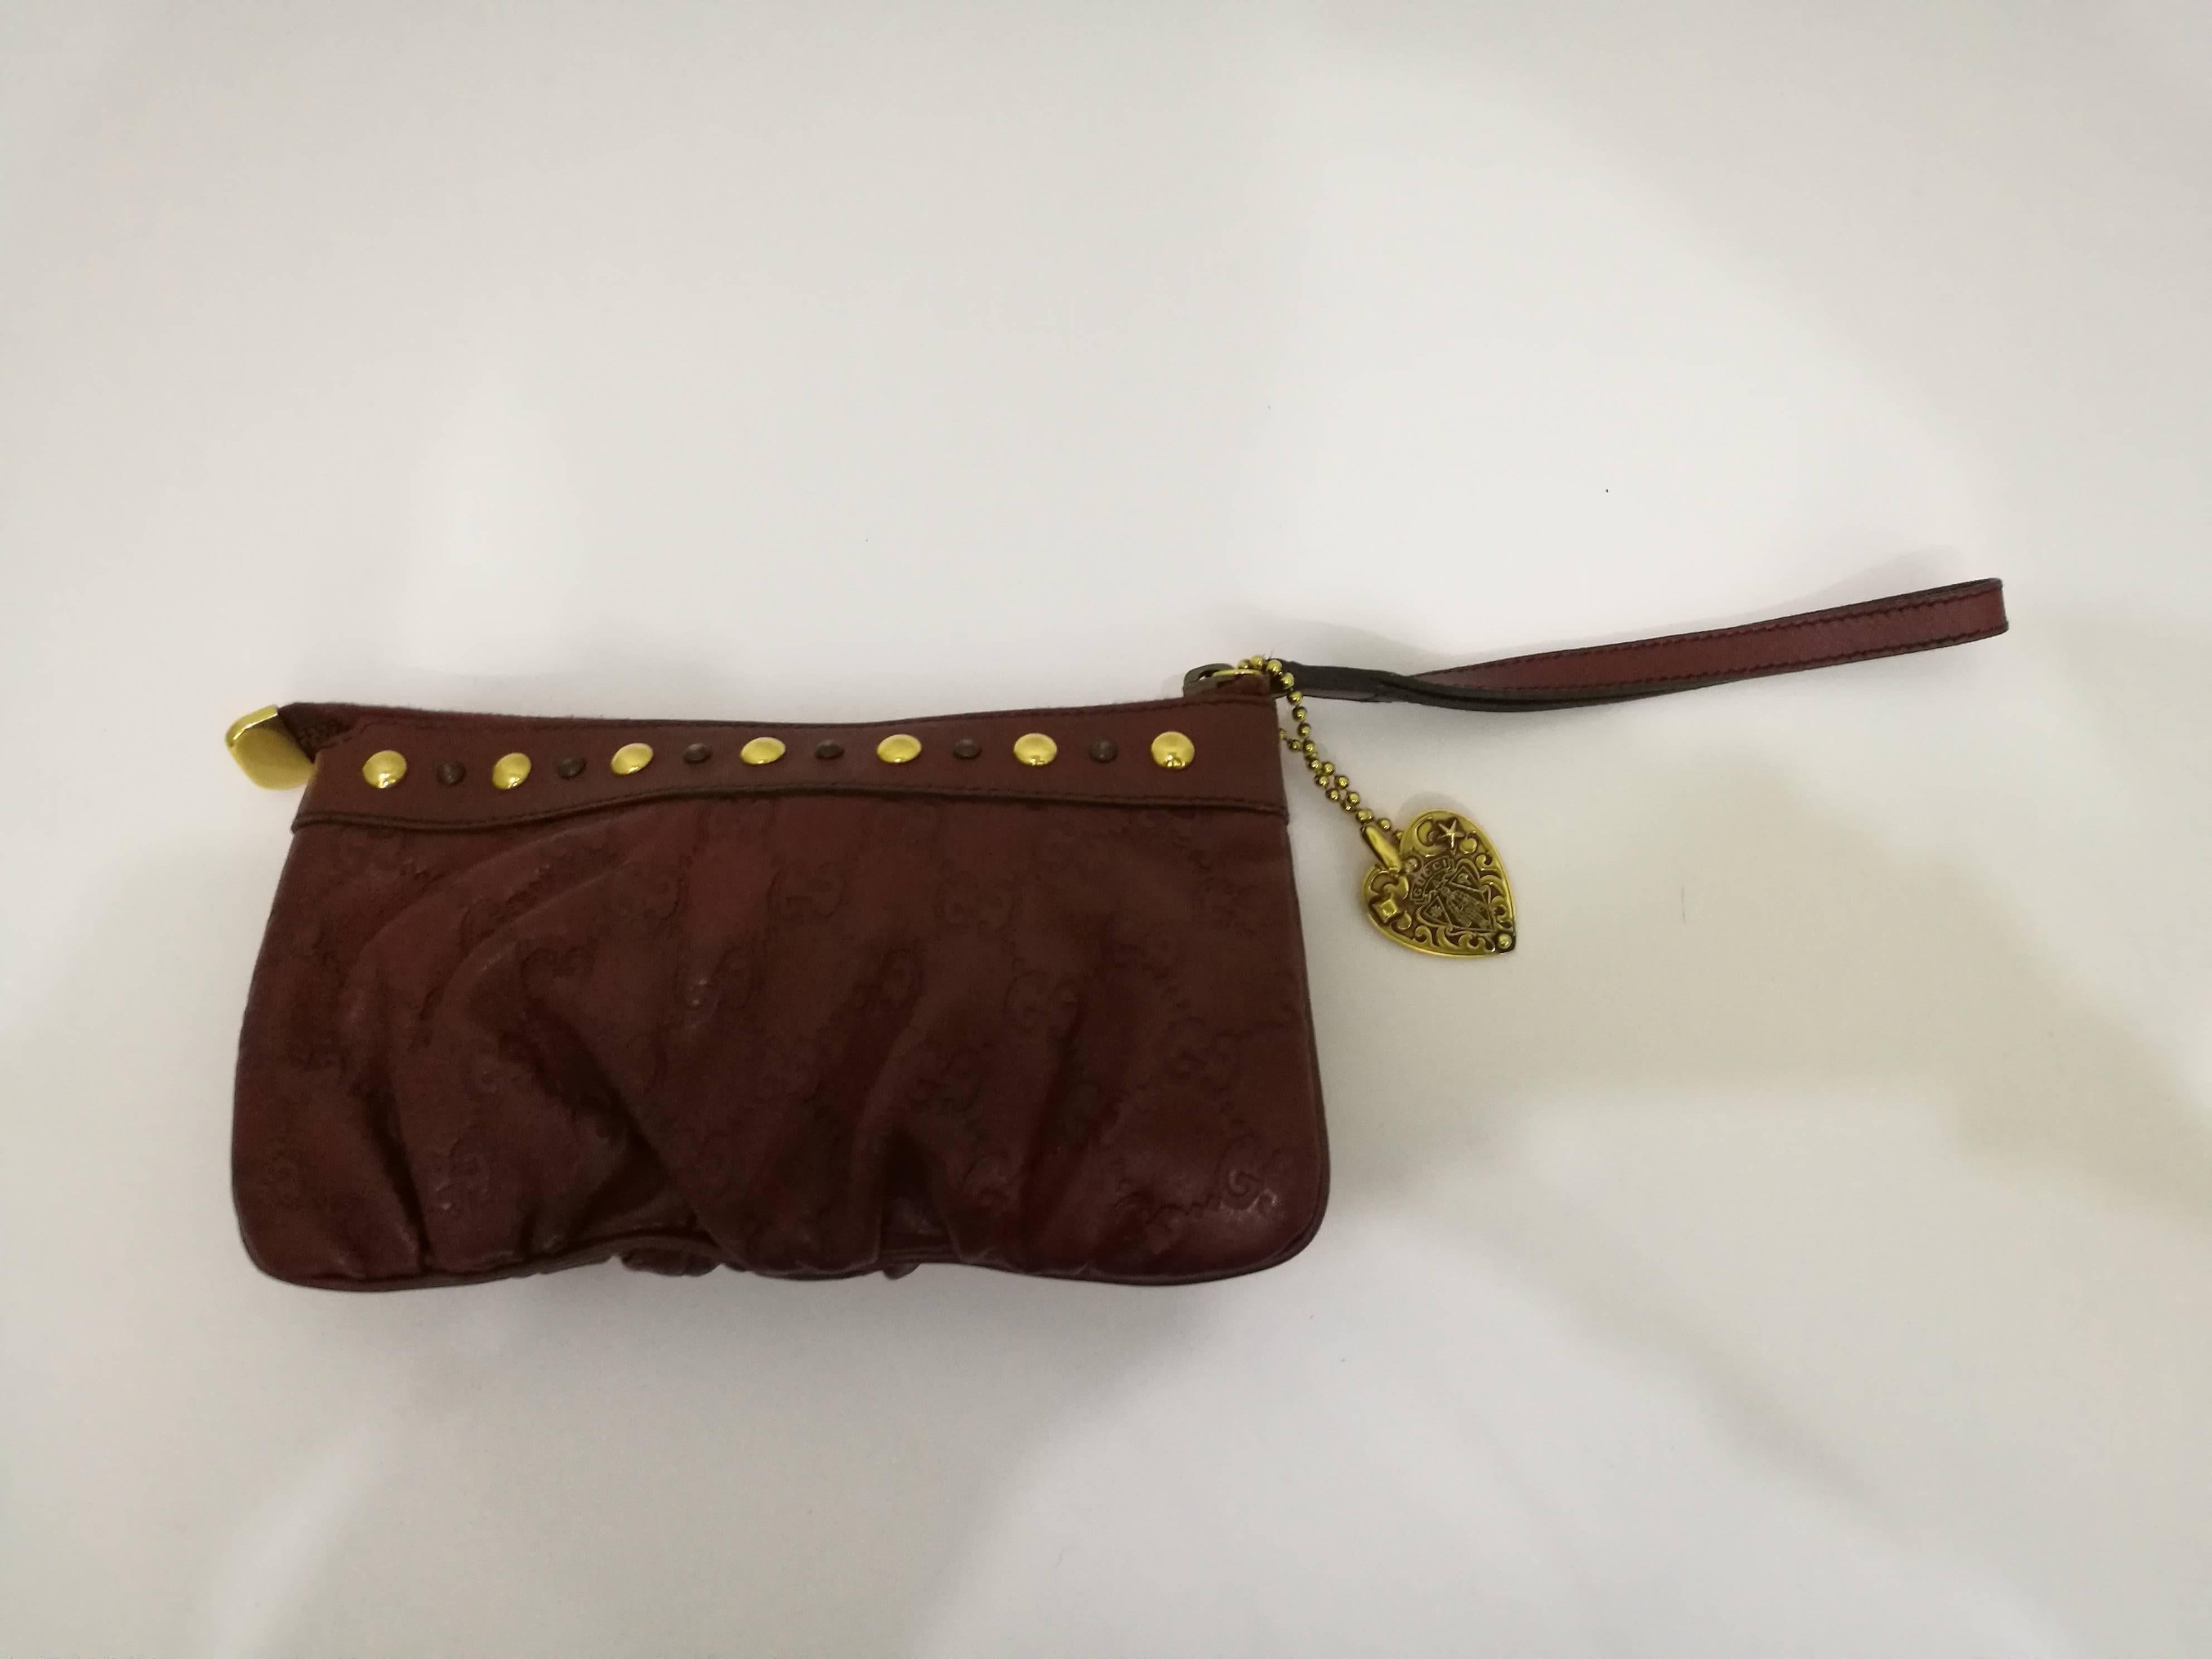 Gucci Bordeaux Pochette
Gold tone hardware
Gold and black tone studs
Totally made in italy